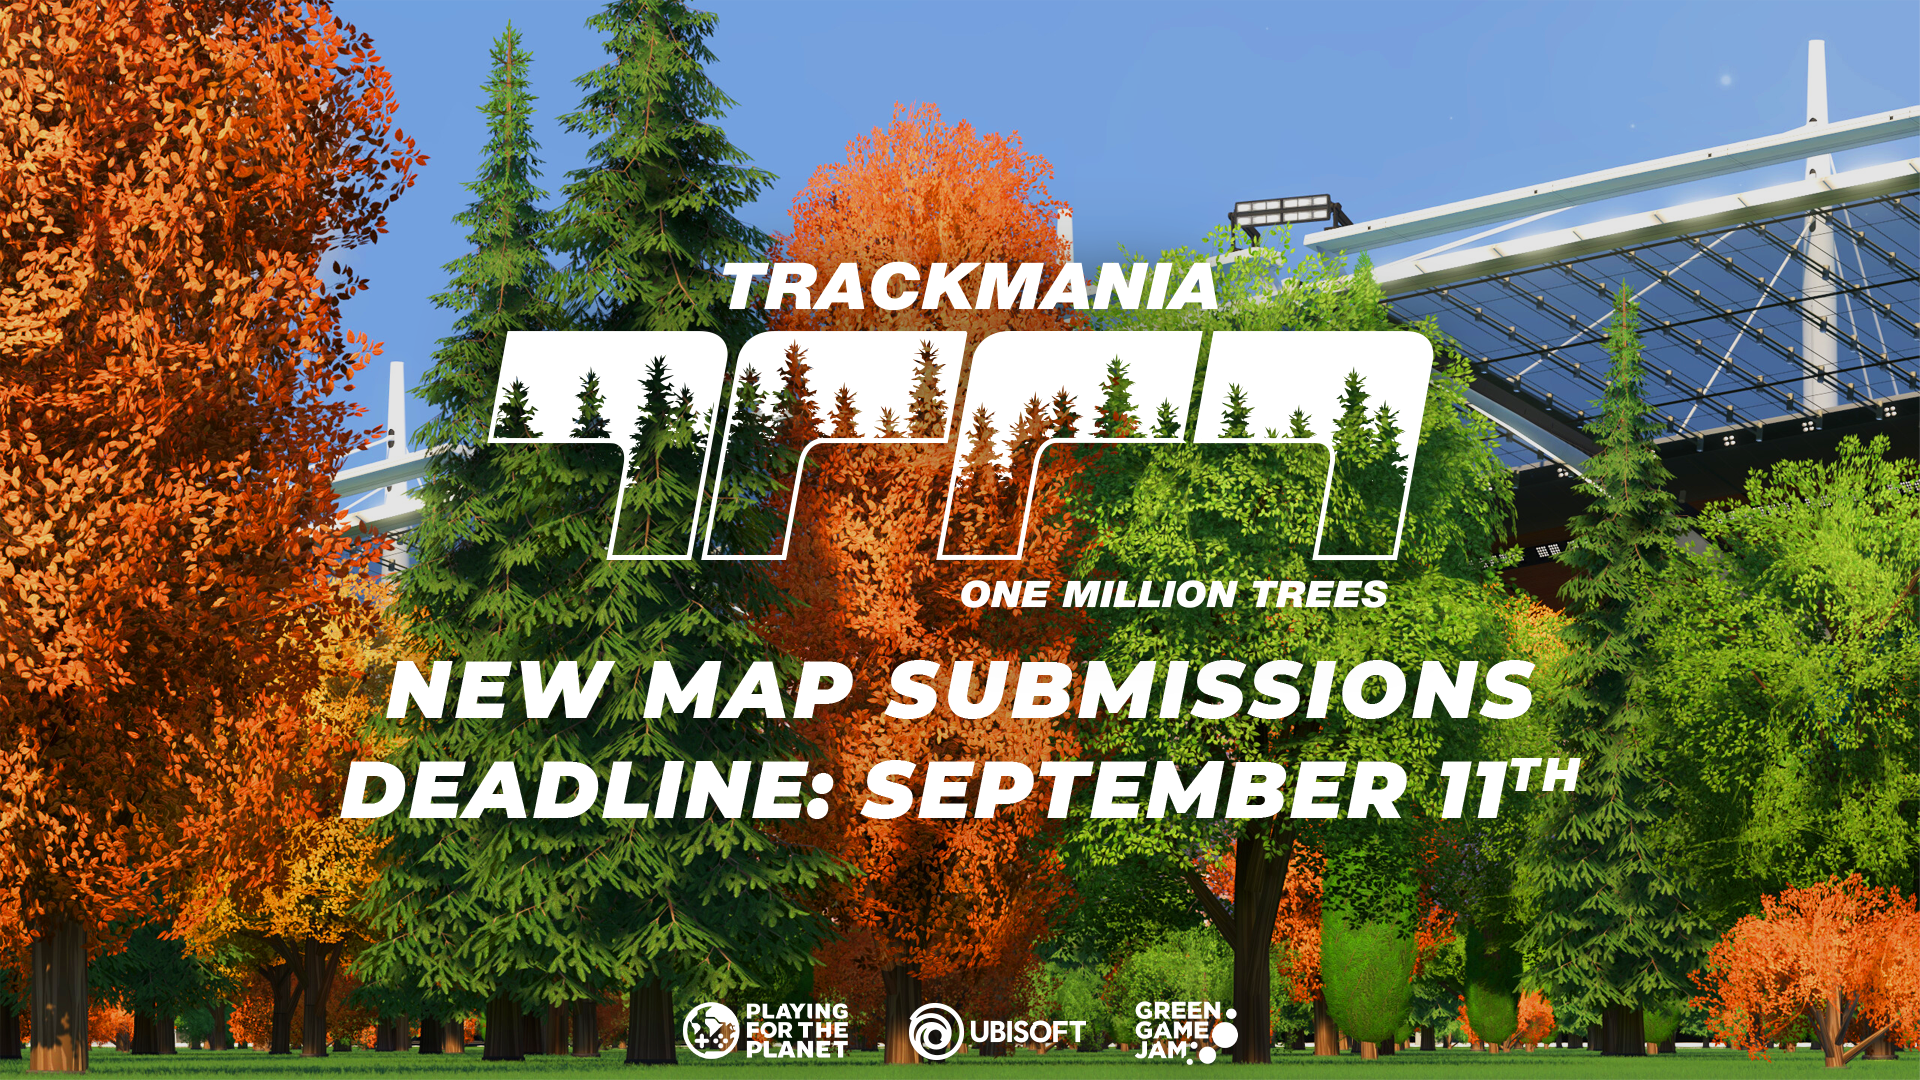 Send in your Green Game Jam maps before September 11th